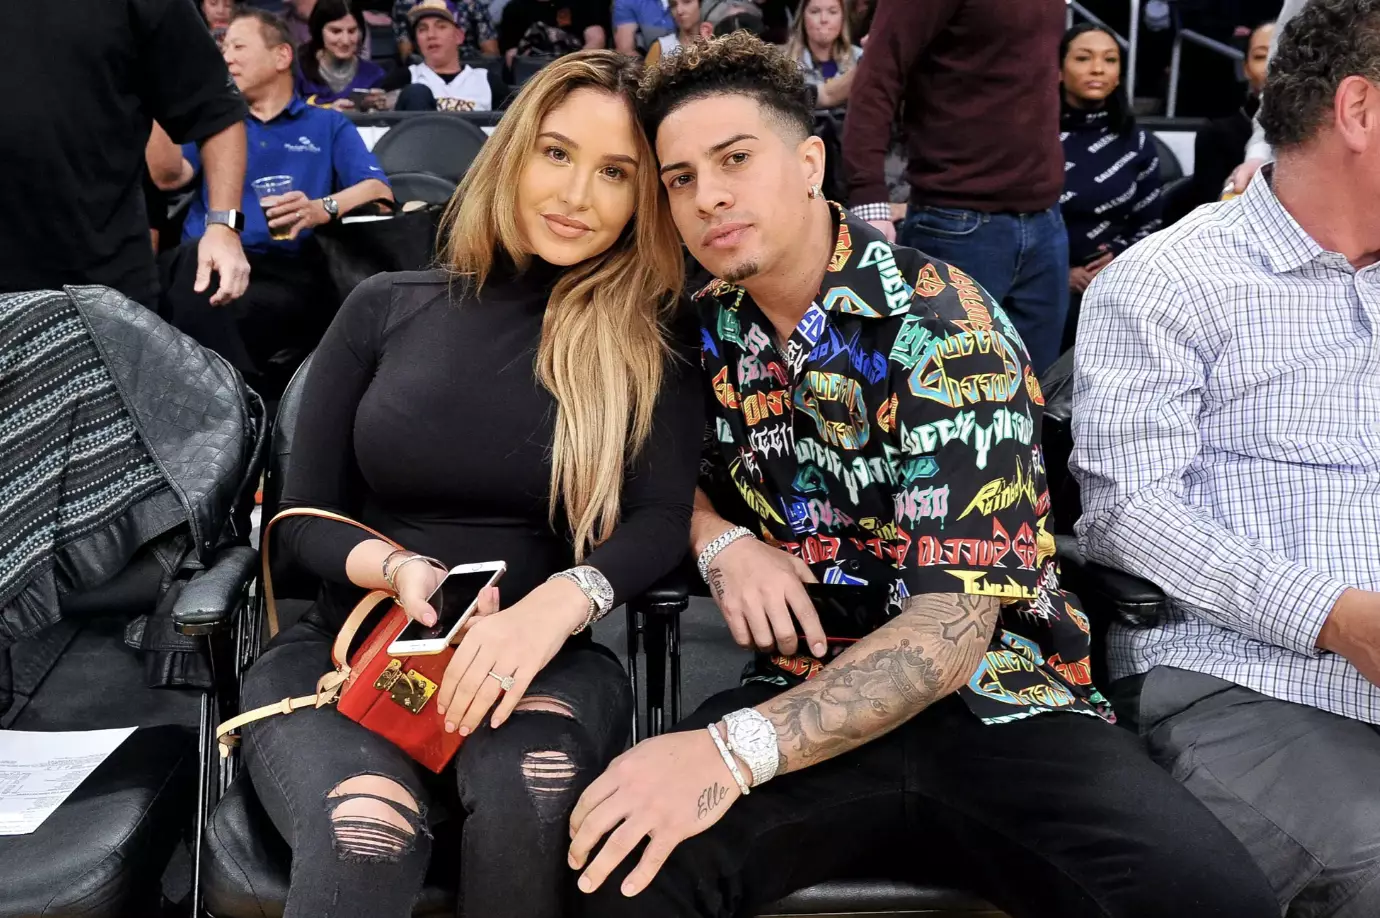 Austin McBroom and Catherine Paiz started dating and decided to combine their social star power